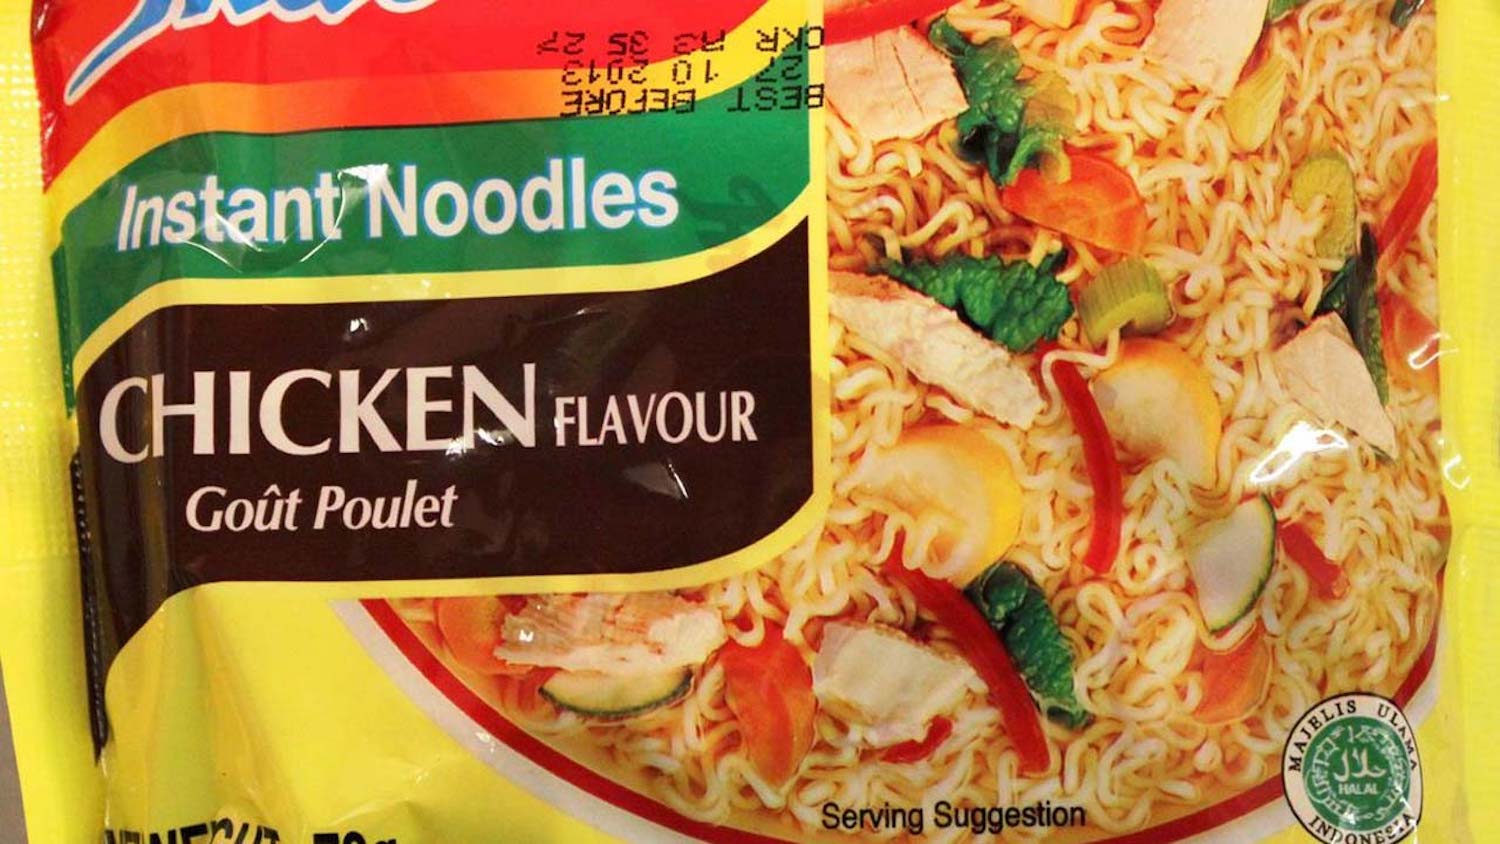 Locally produced Indomie Instant Noodles are safe